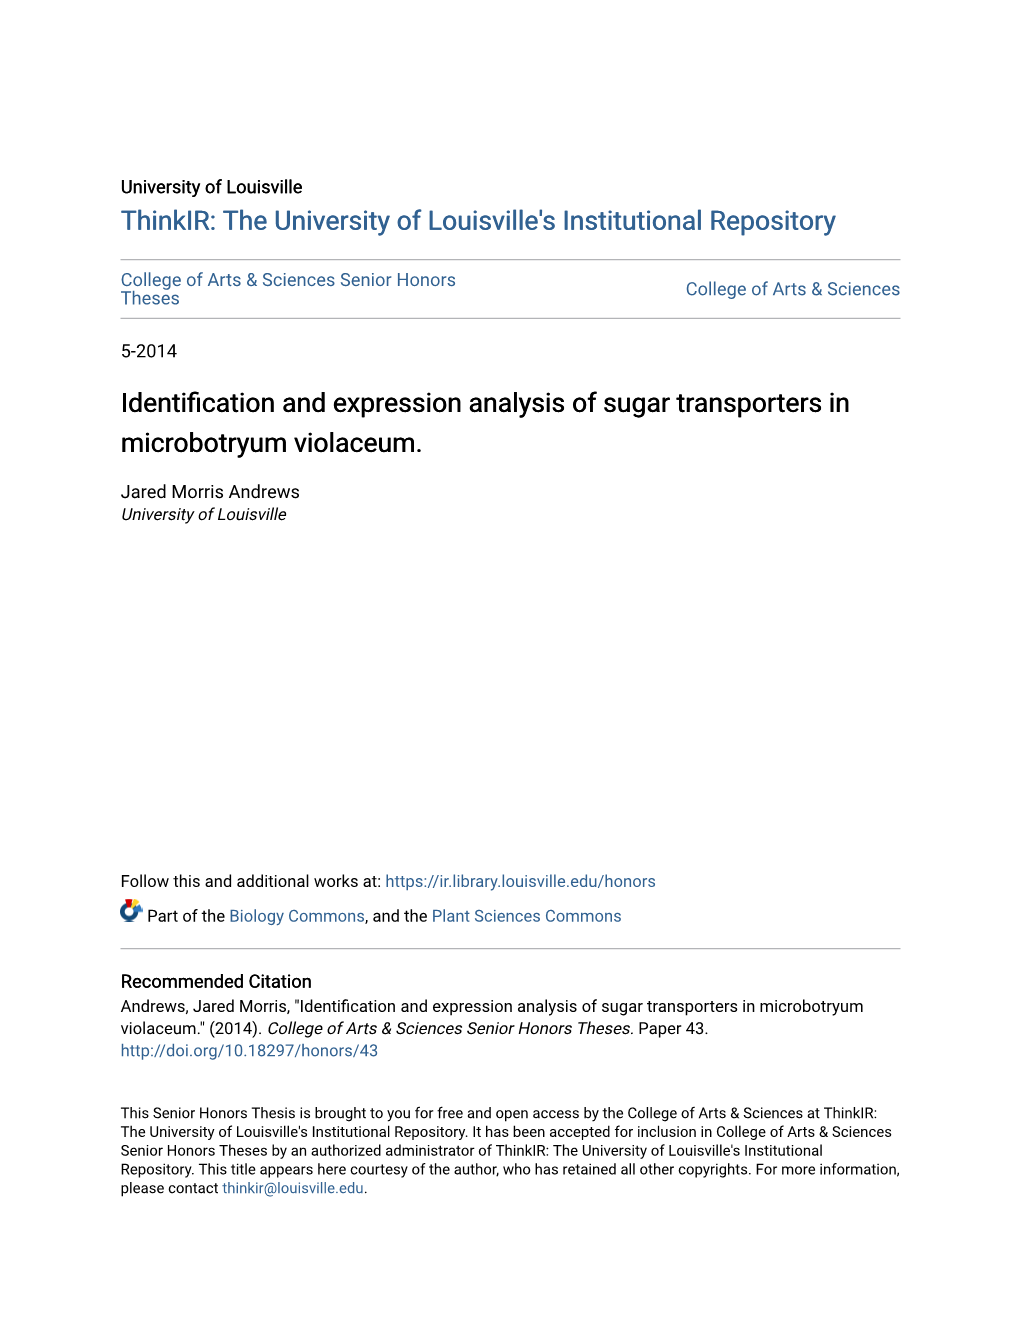 Identification and Expression Analysis of Sugar Transporters in Microbotryum Violaceum